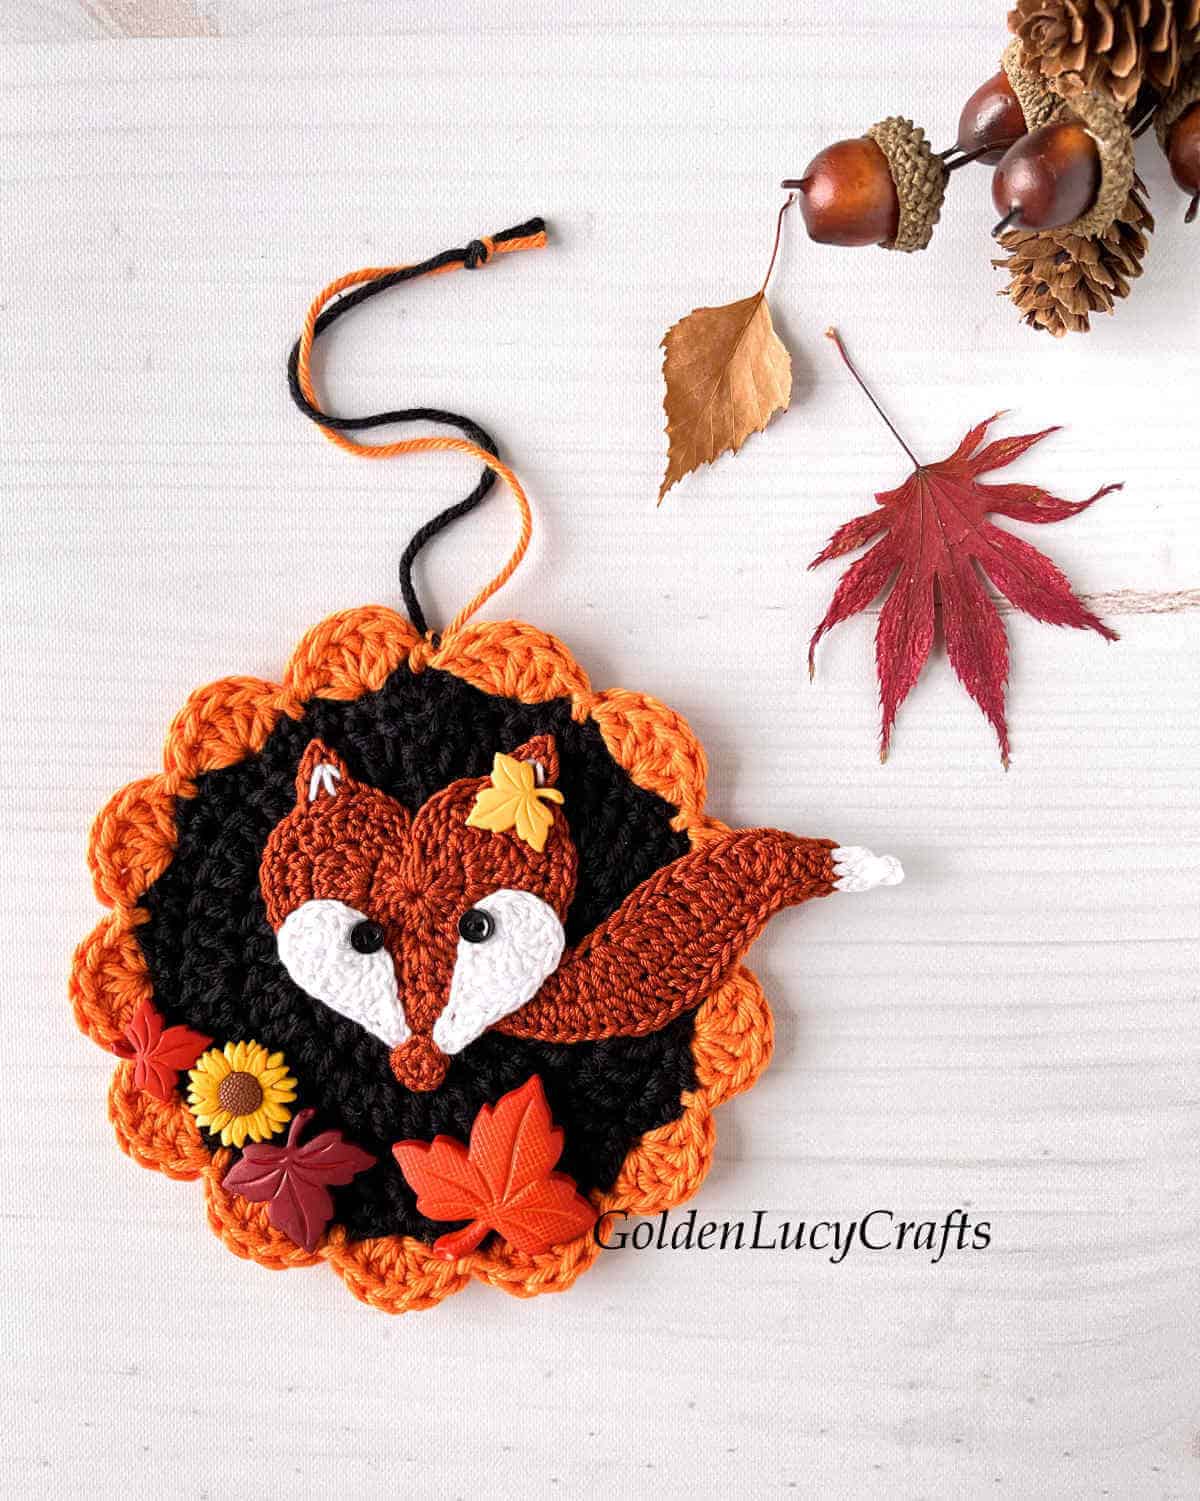 Crochet ornament with fox and craft buttons.